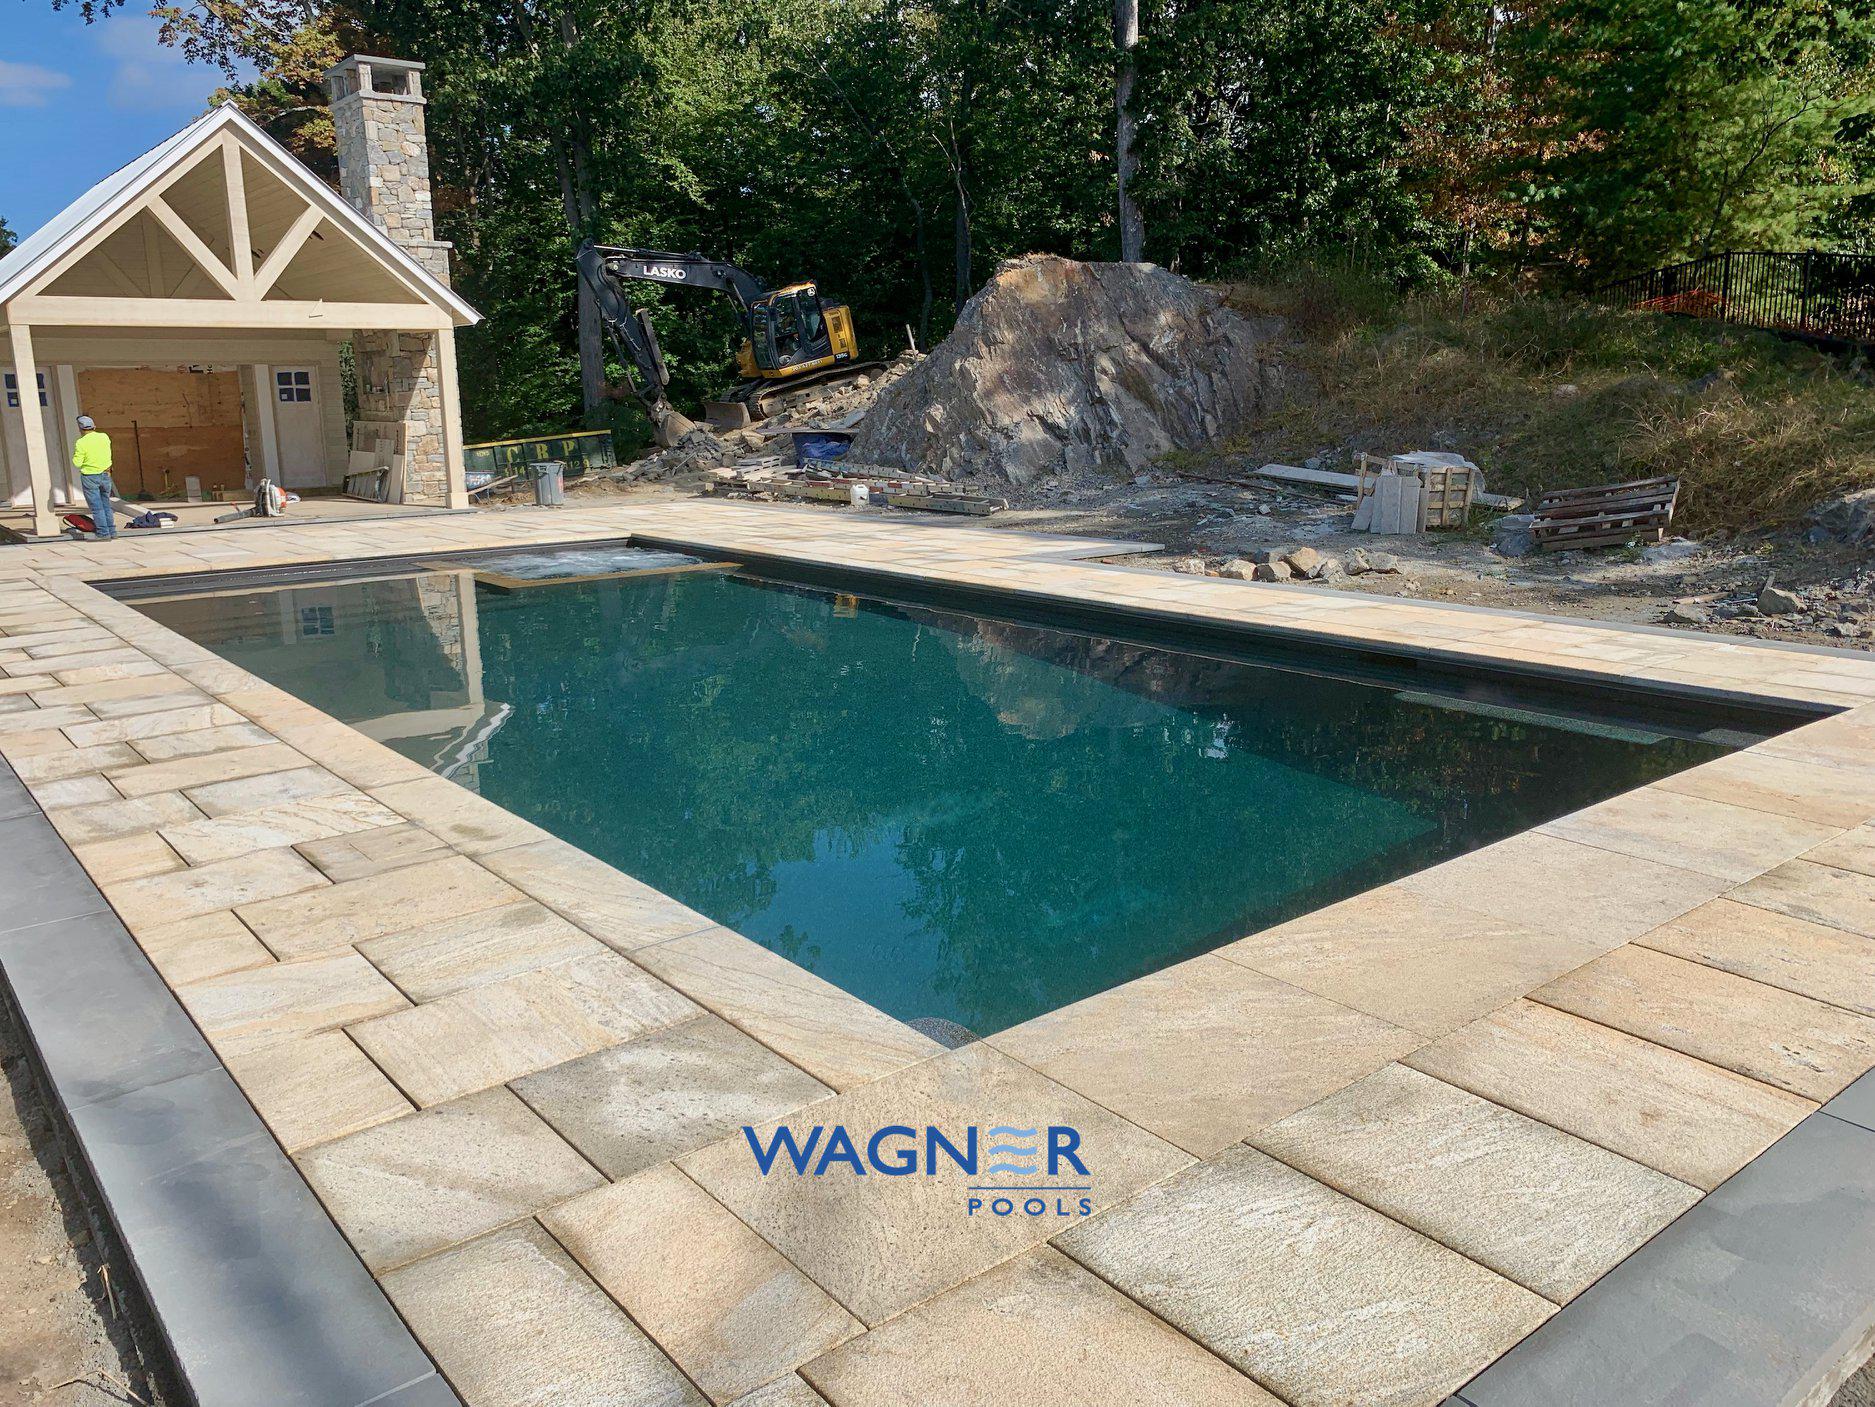 Call now for a pool installation service! Wagner Pools Darien (203)655-0766